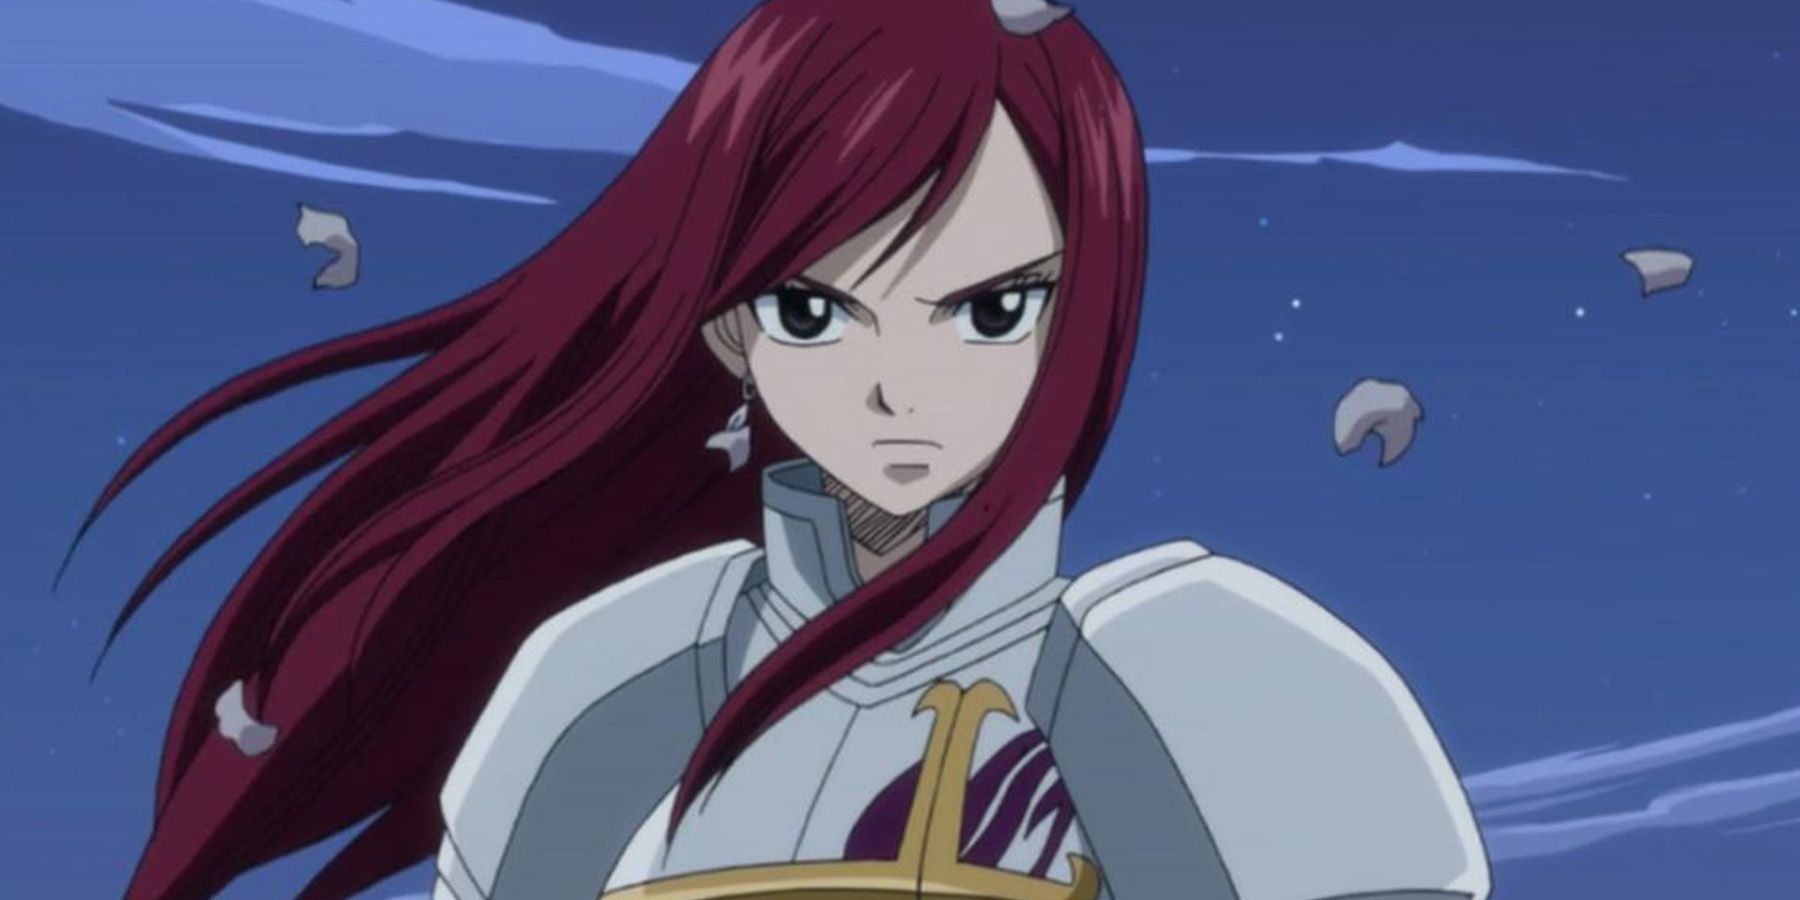 Erza Scarlet in Fairy Tail.